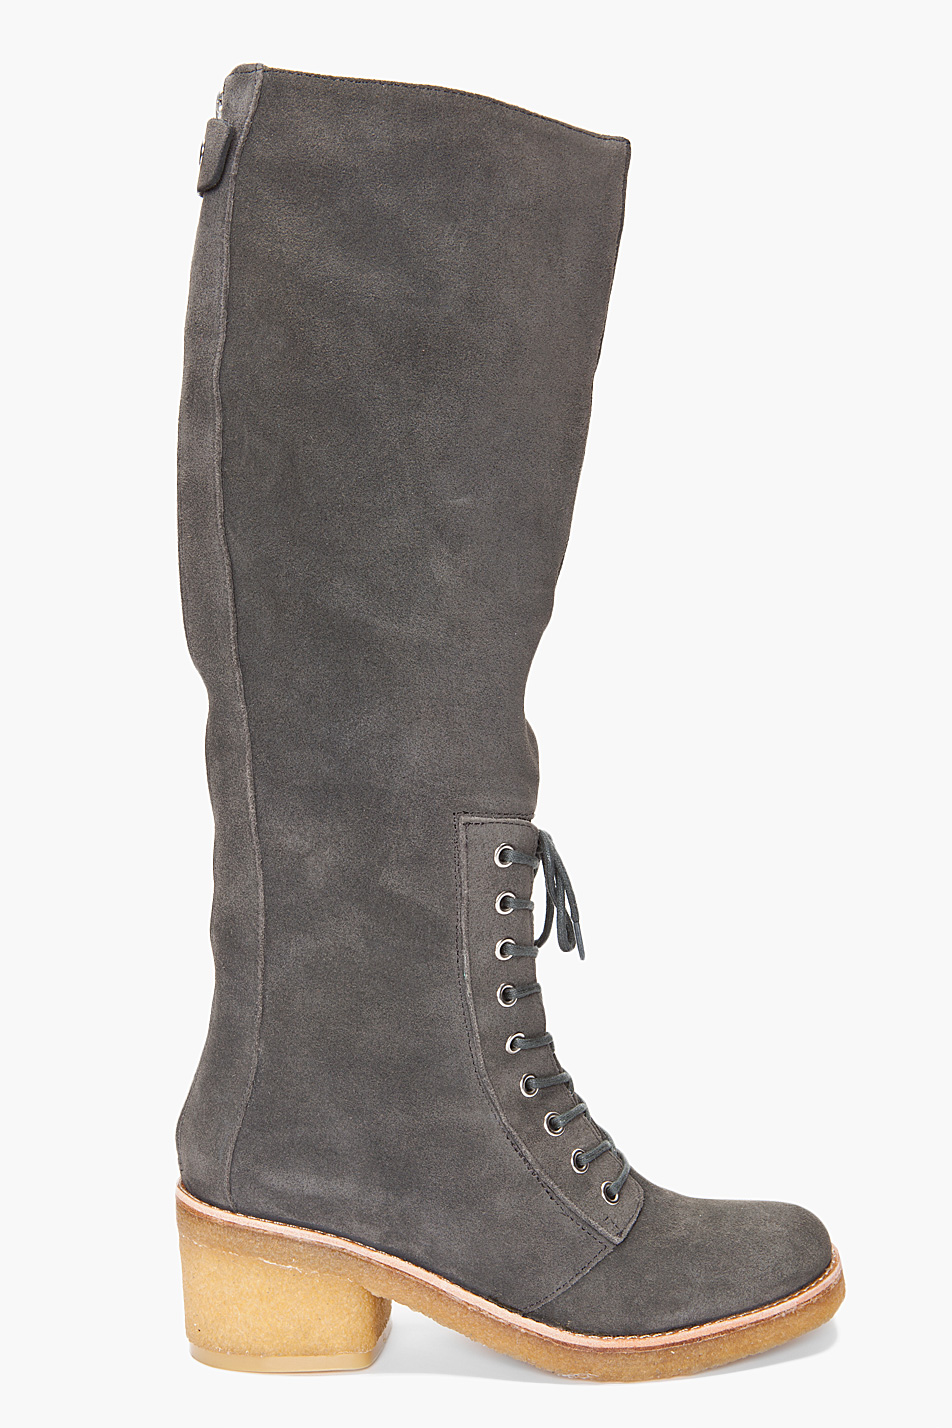 Belle By Sigerson Morrison Grey Tall Suede Lace Up Boots Product 1 1959796 476127414 